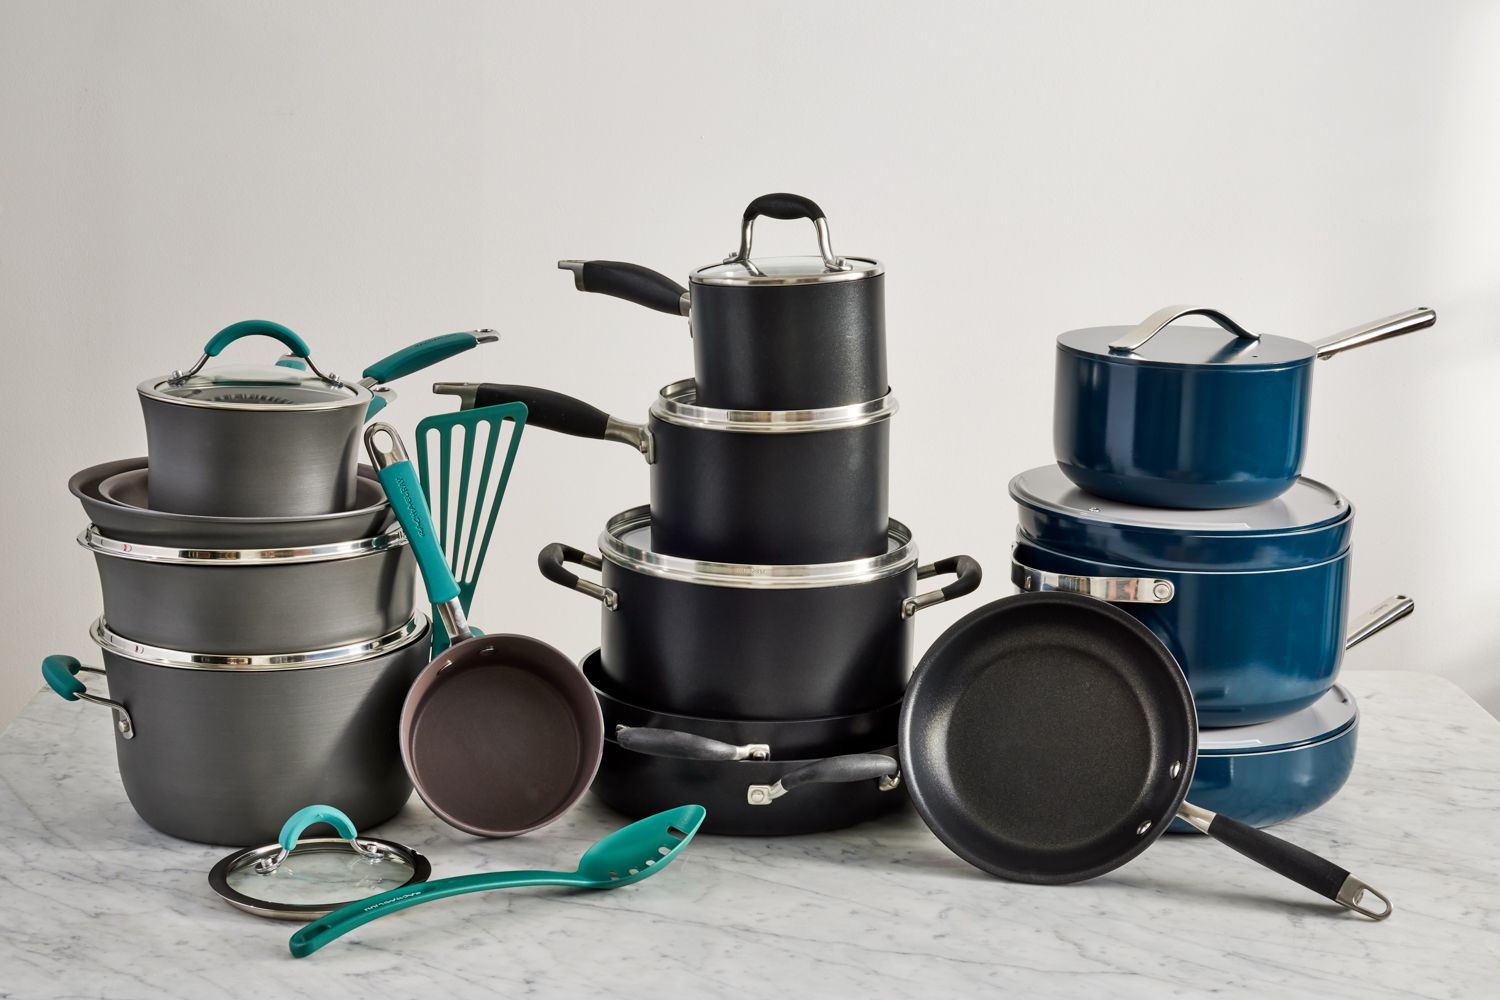 Several nonstick cookware sets displayed on a marbled surface